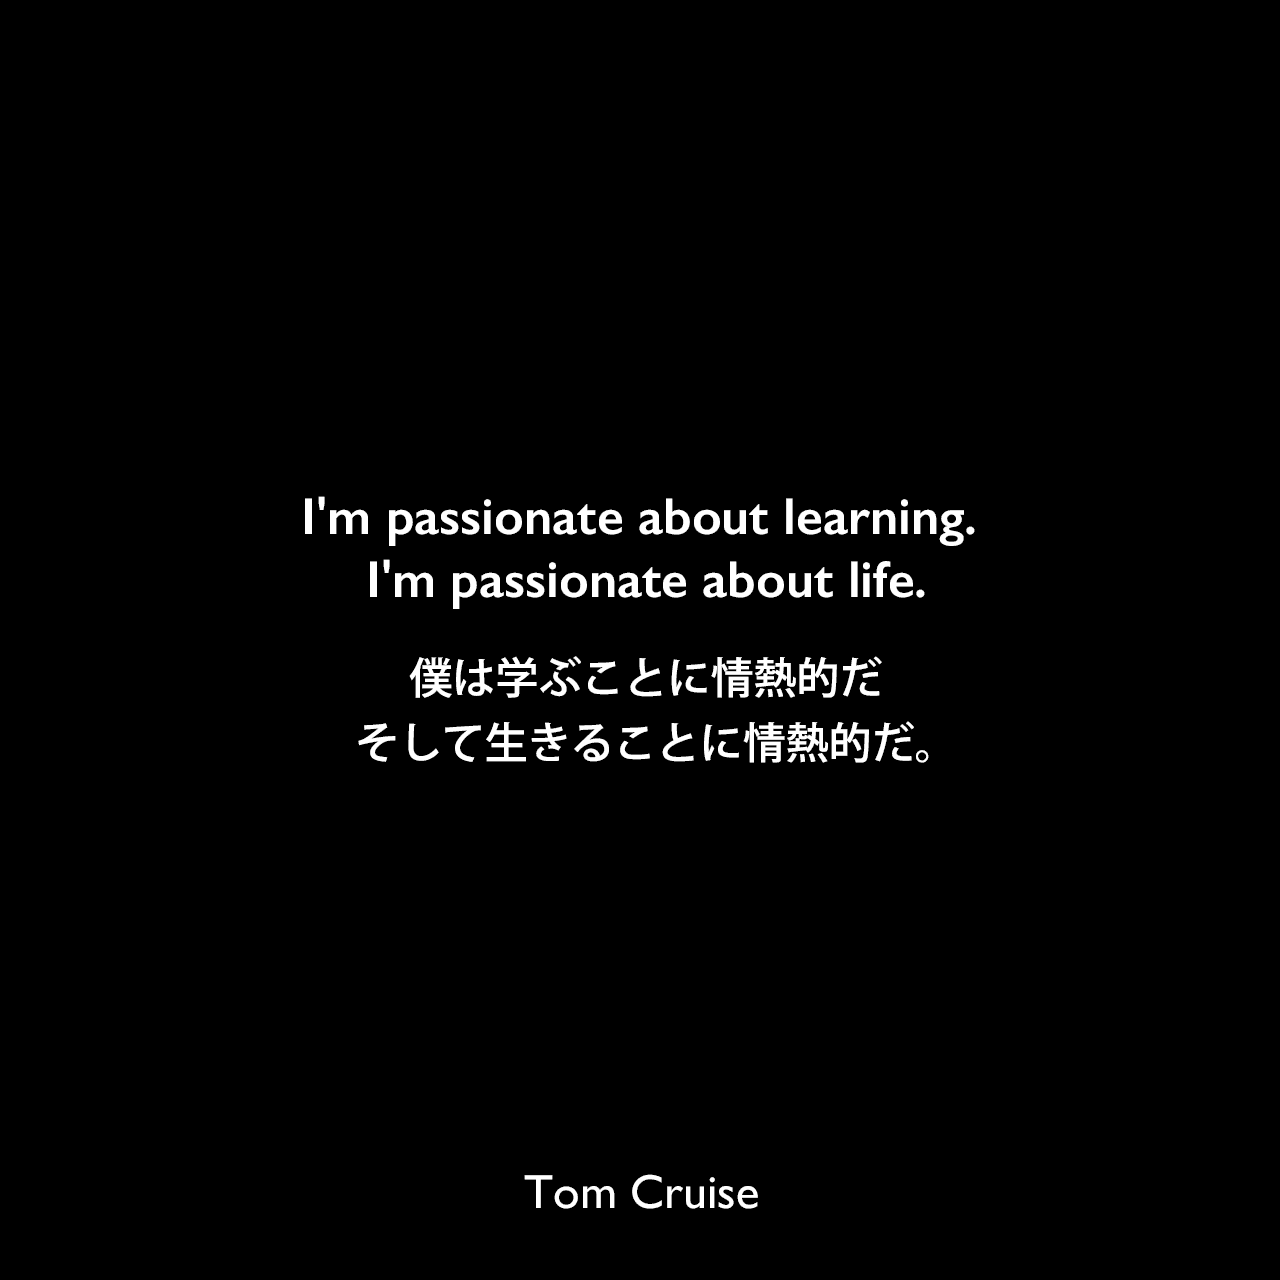 I'm passionate about learning. I'm passionate about life.僕は学ぶことに情熱的だ、そして生きることに情熱的だ。